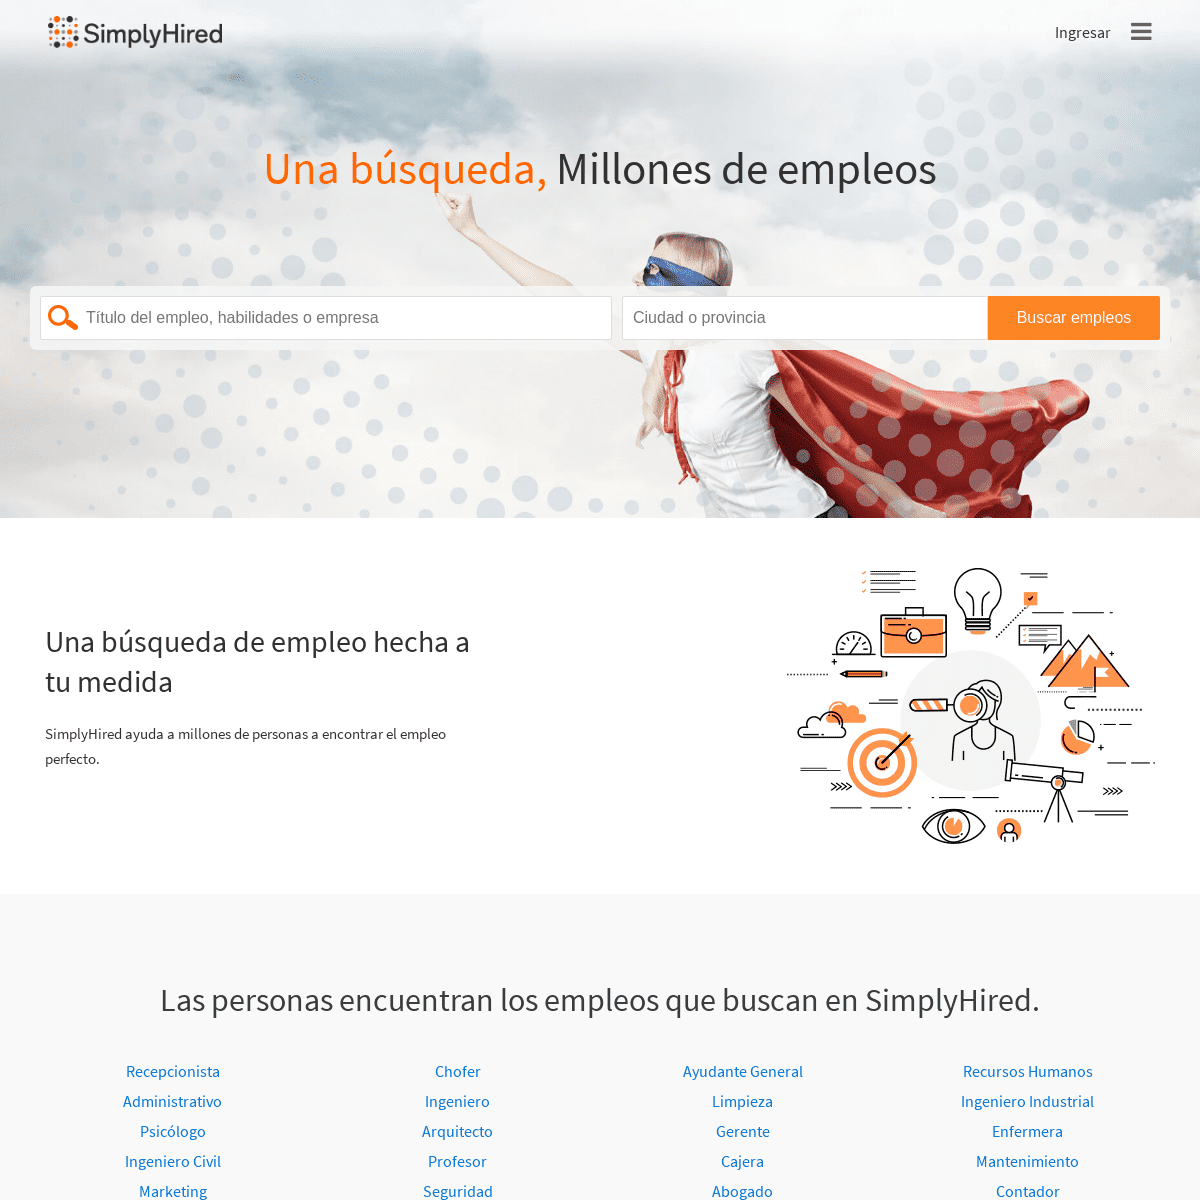 A complete backup of simplyhired.com.ar